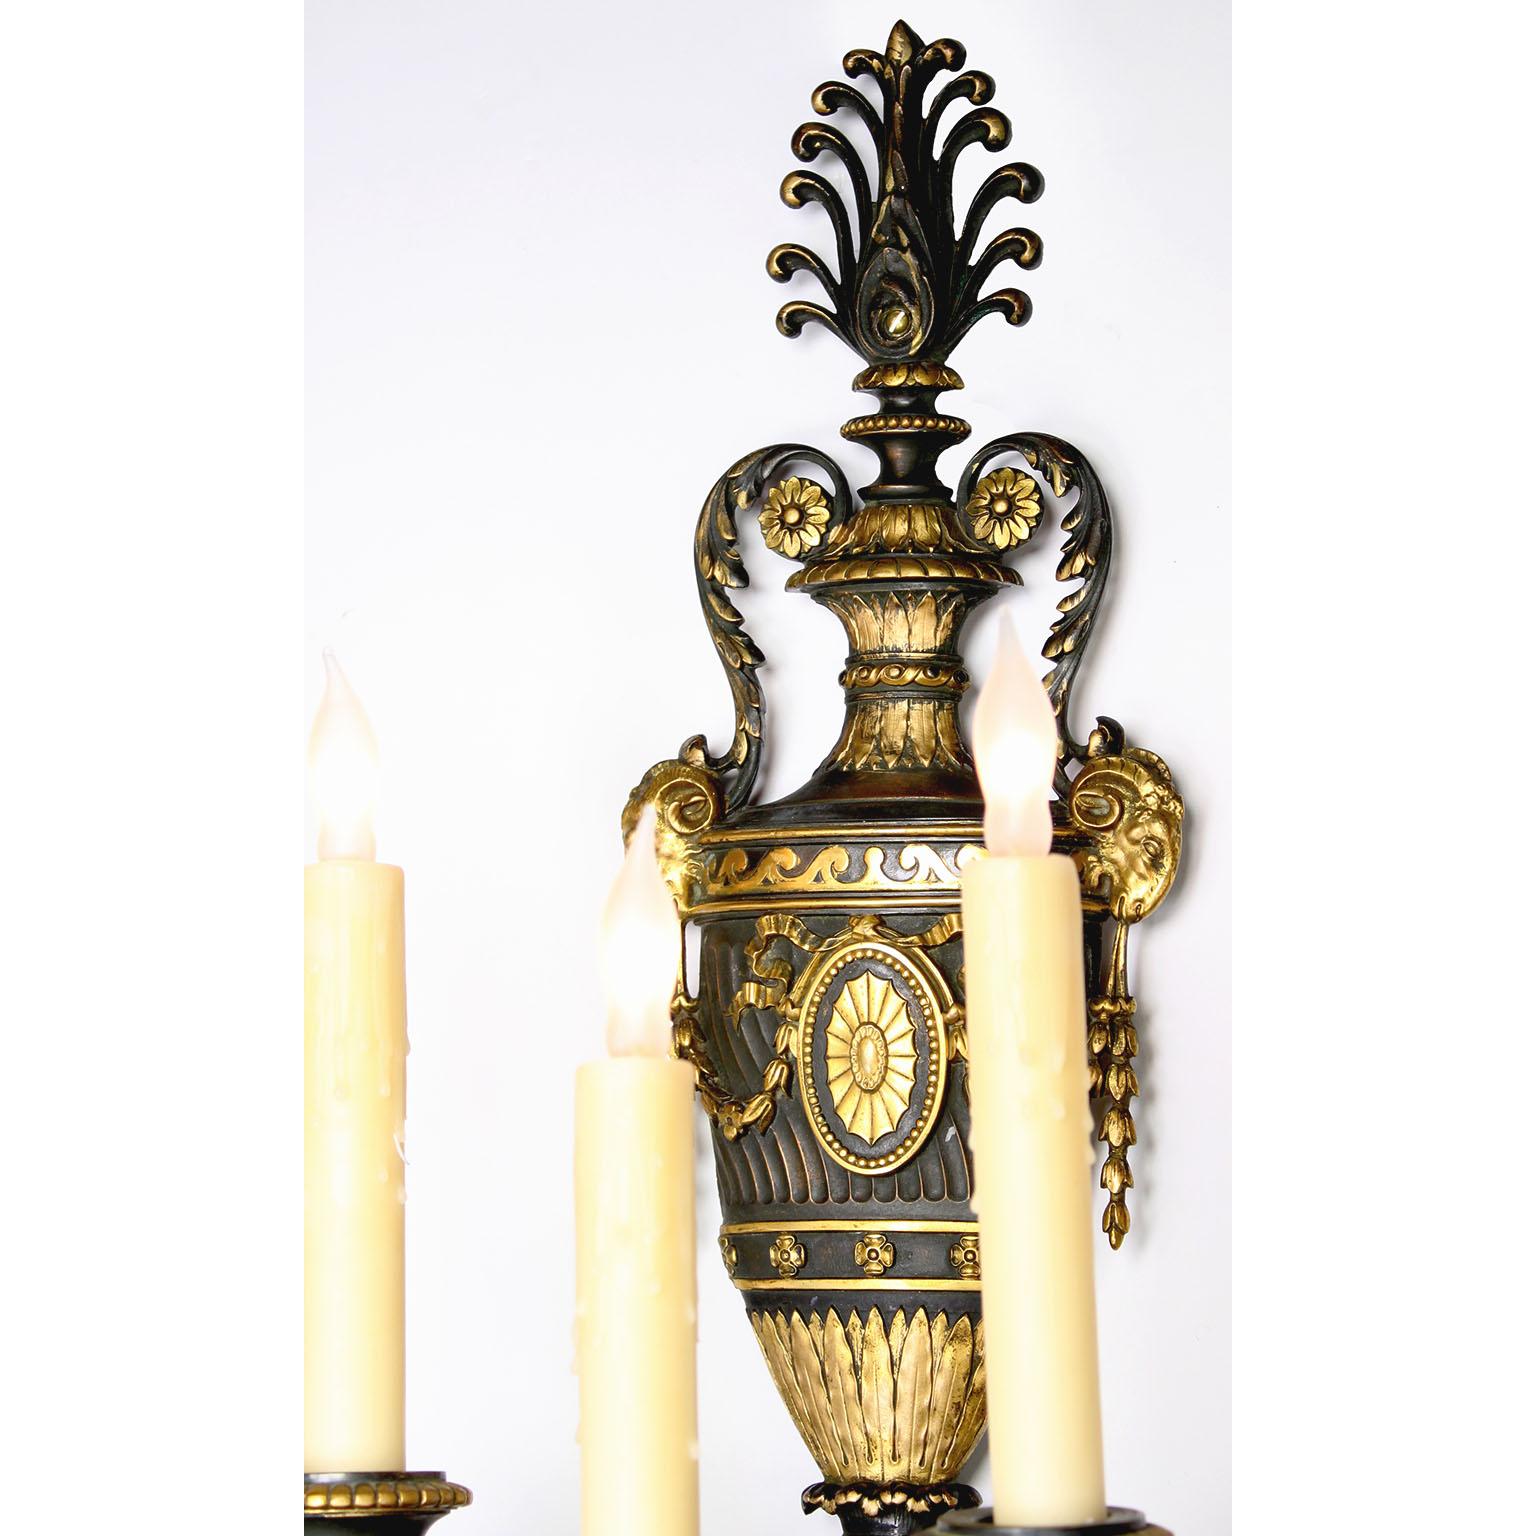 Pr. French 19th Century Empire Neoclassical Style Parcel-Gilt Bronze Wall Lights For Sale 2